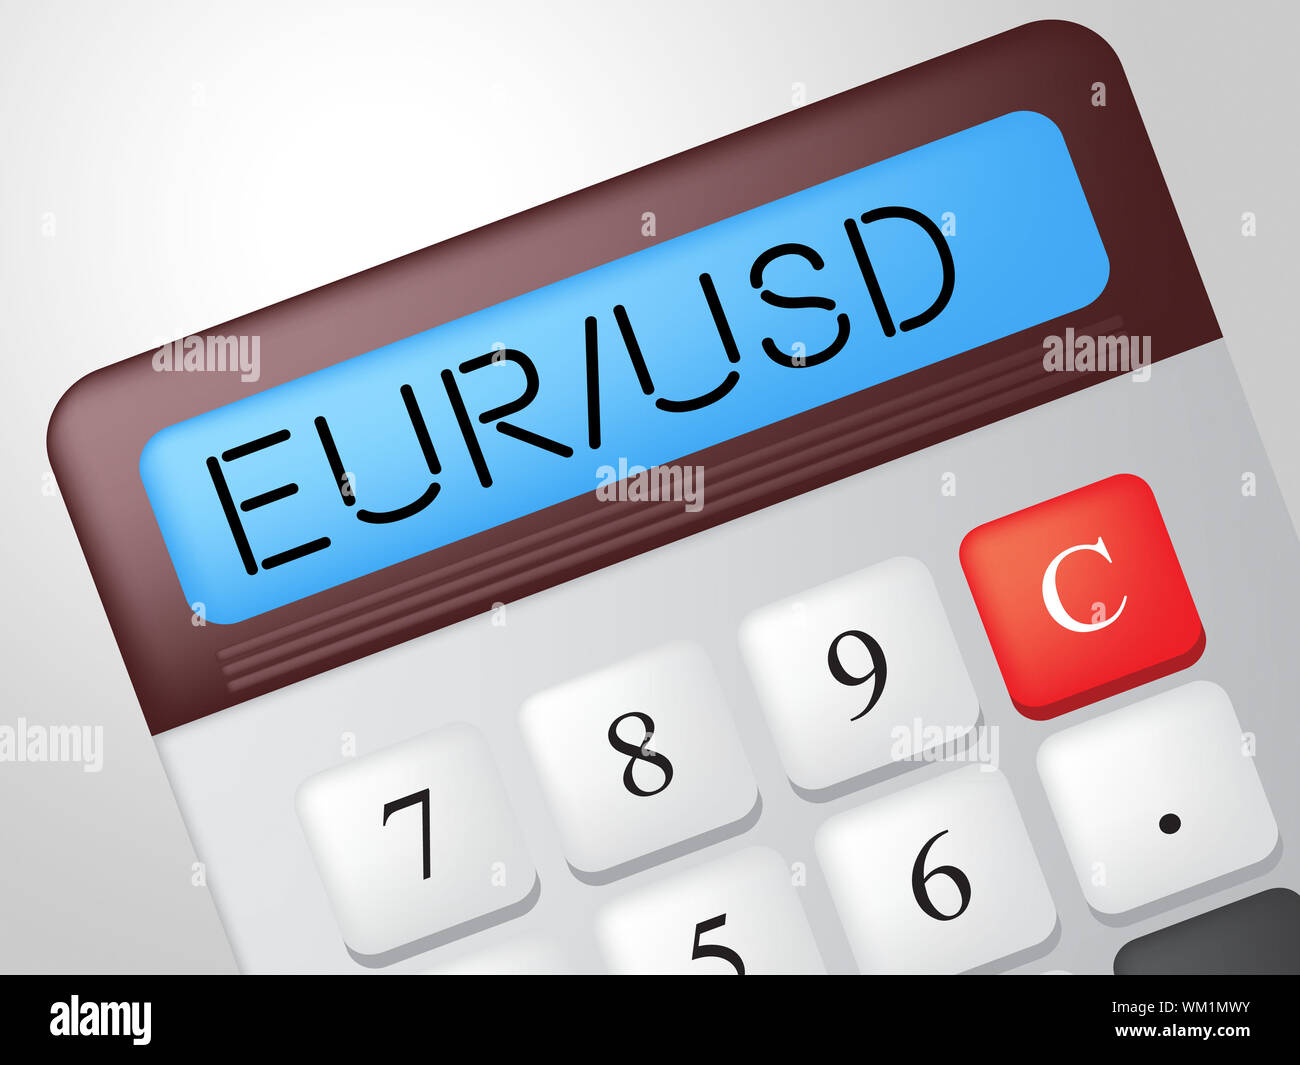 Eur Usd Calculator Representing Euro Sign And Banking Stock Photo - Alamy